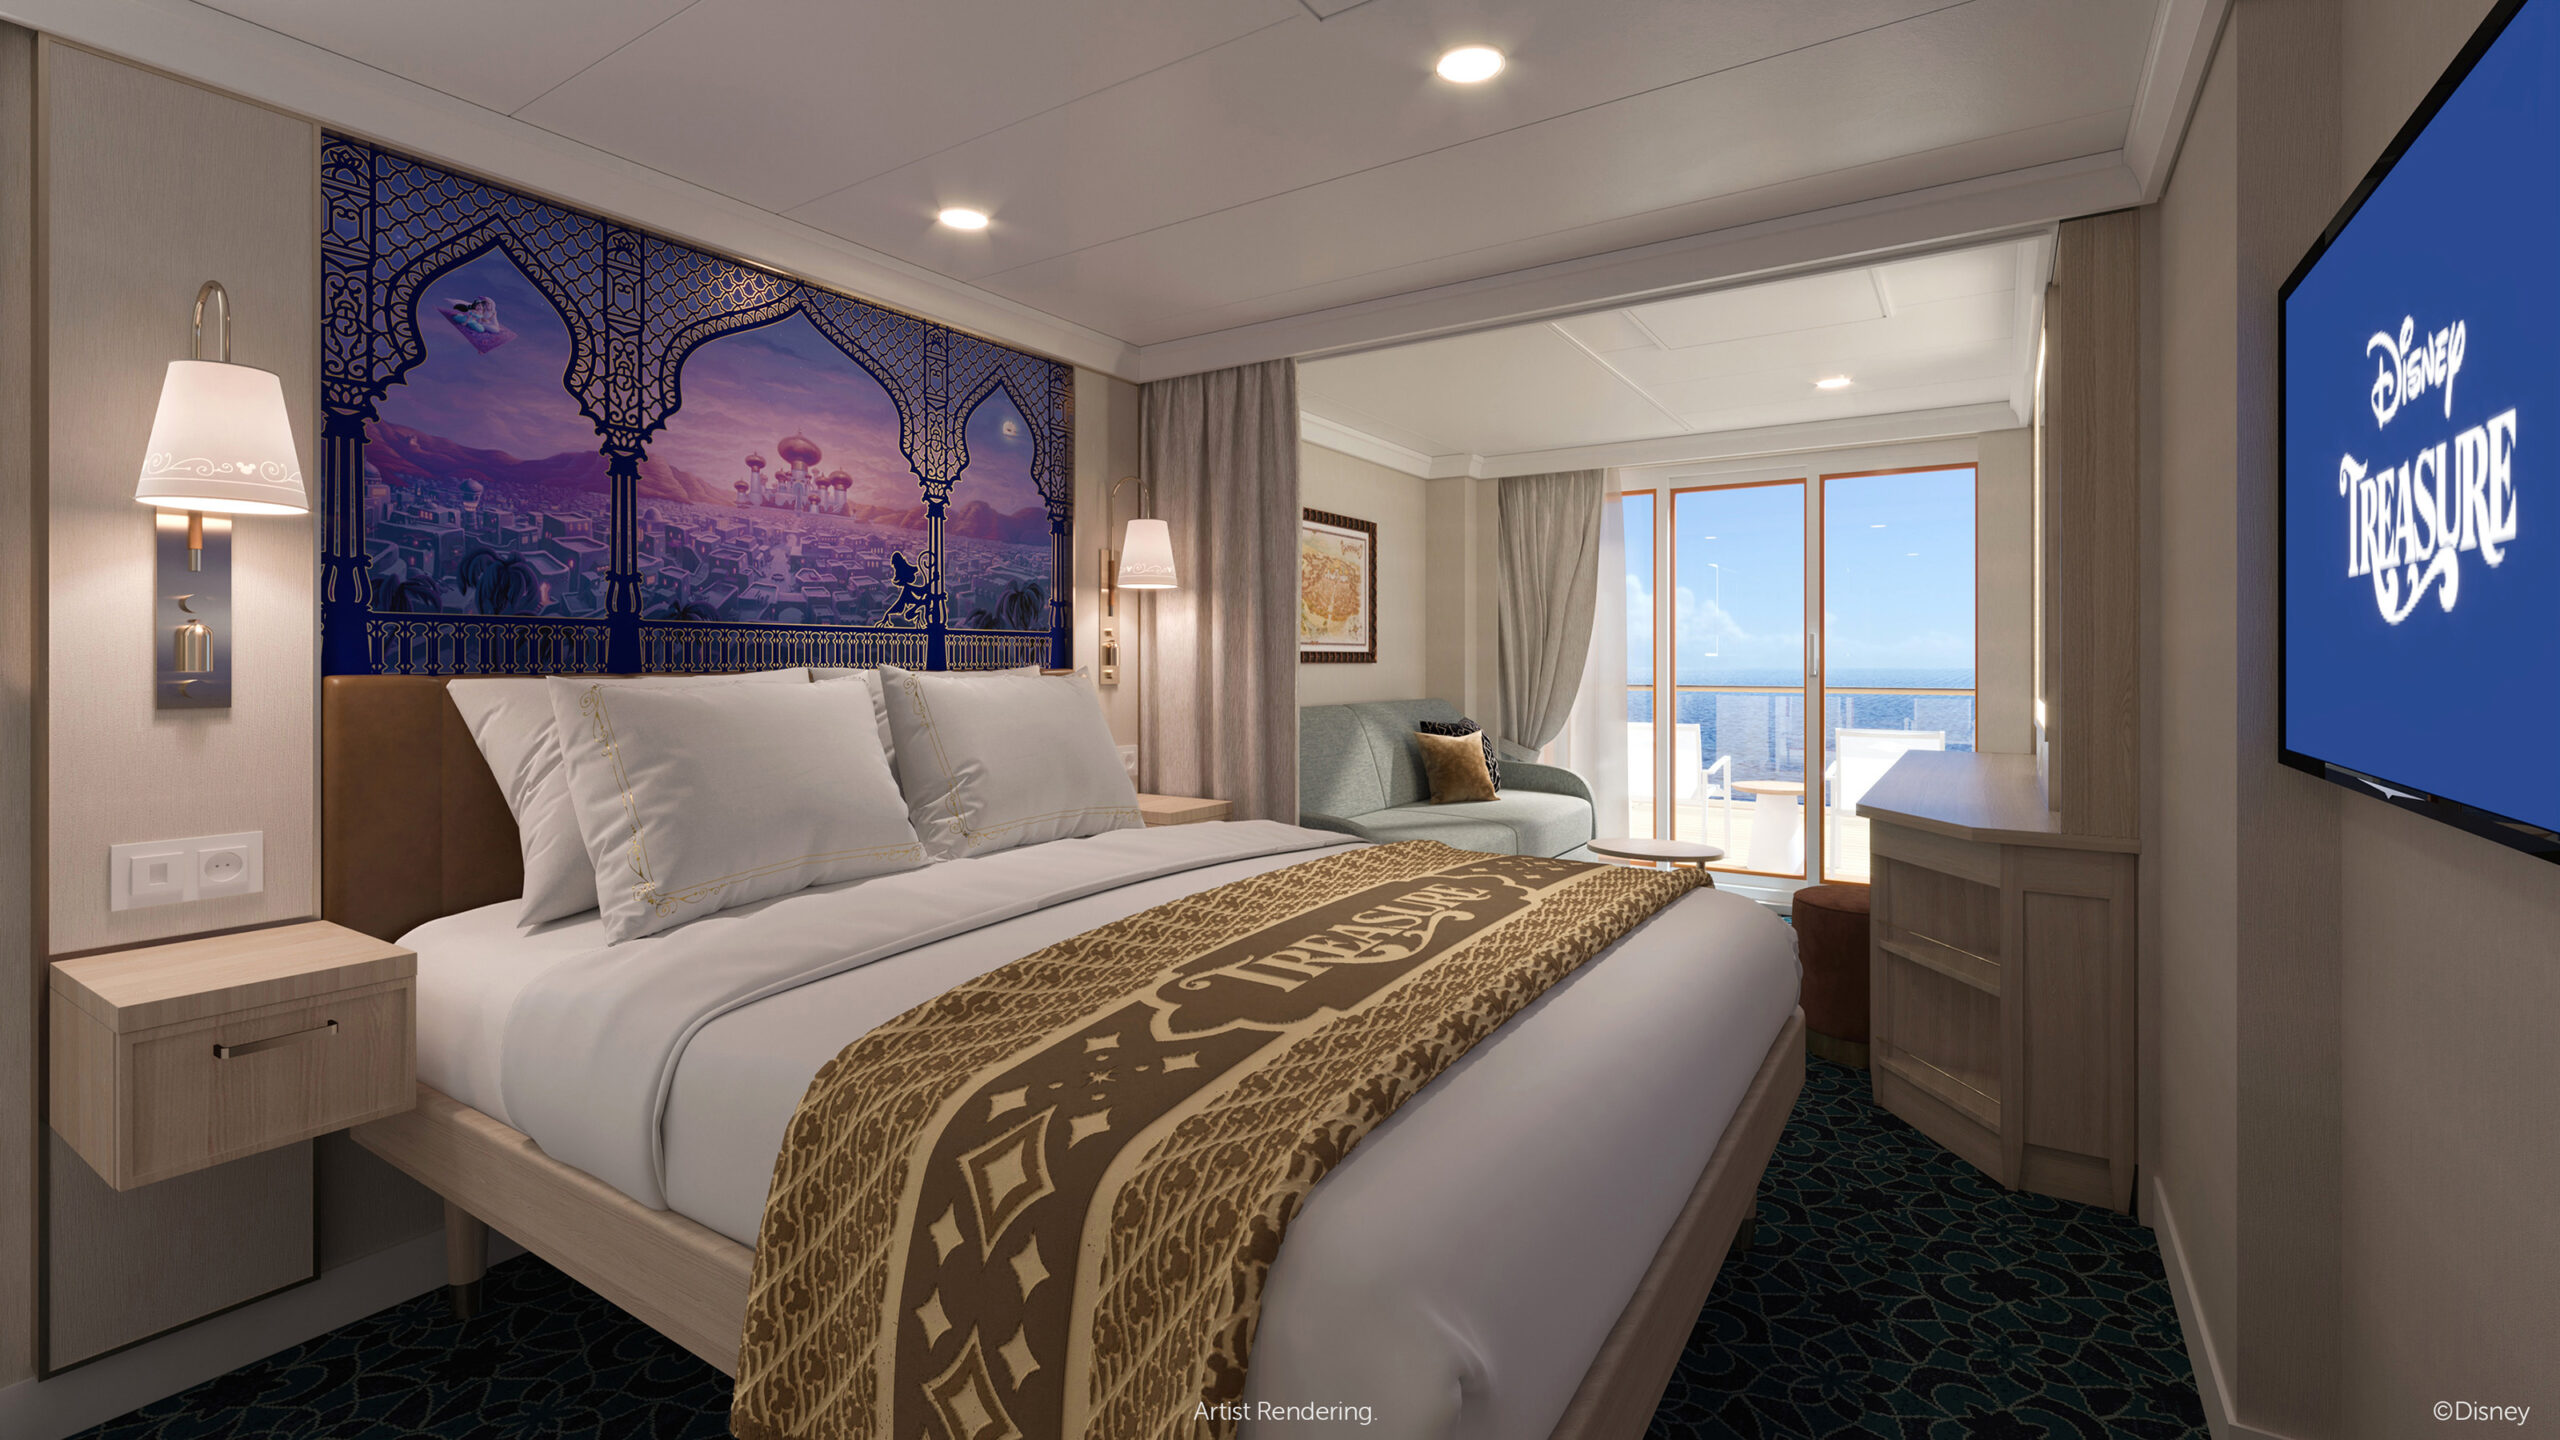 The luxurious accommodations aboard Disney Cruise Line’s newest ship, the Disney Treasure, will strike an inviting balance between modern design and nostalgic charm with a fresh, natural color scheme and custom artwork that entices guests to peer beyond their staterooms into fantastical worlds from heartwarming Disney adventures. (Disney)